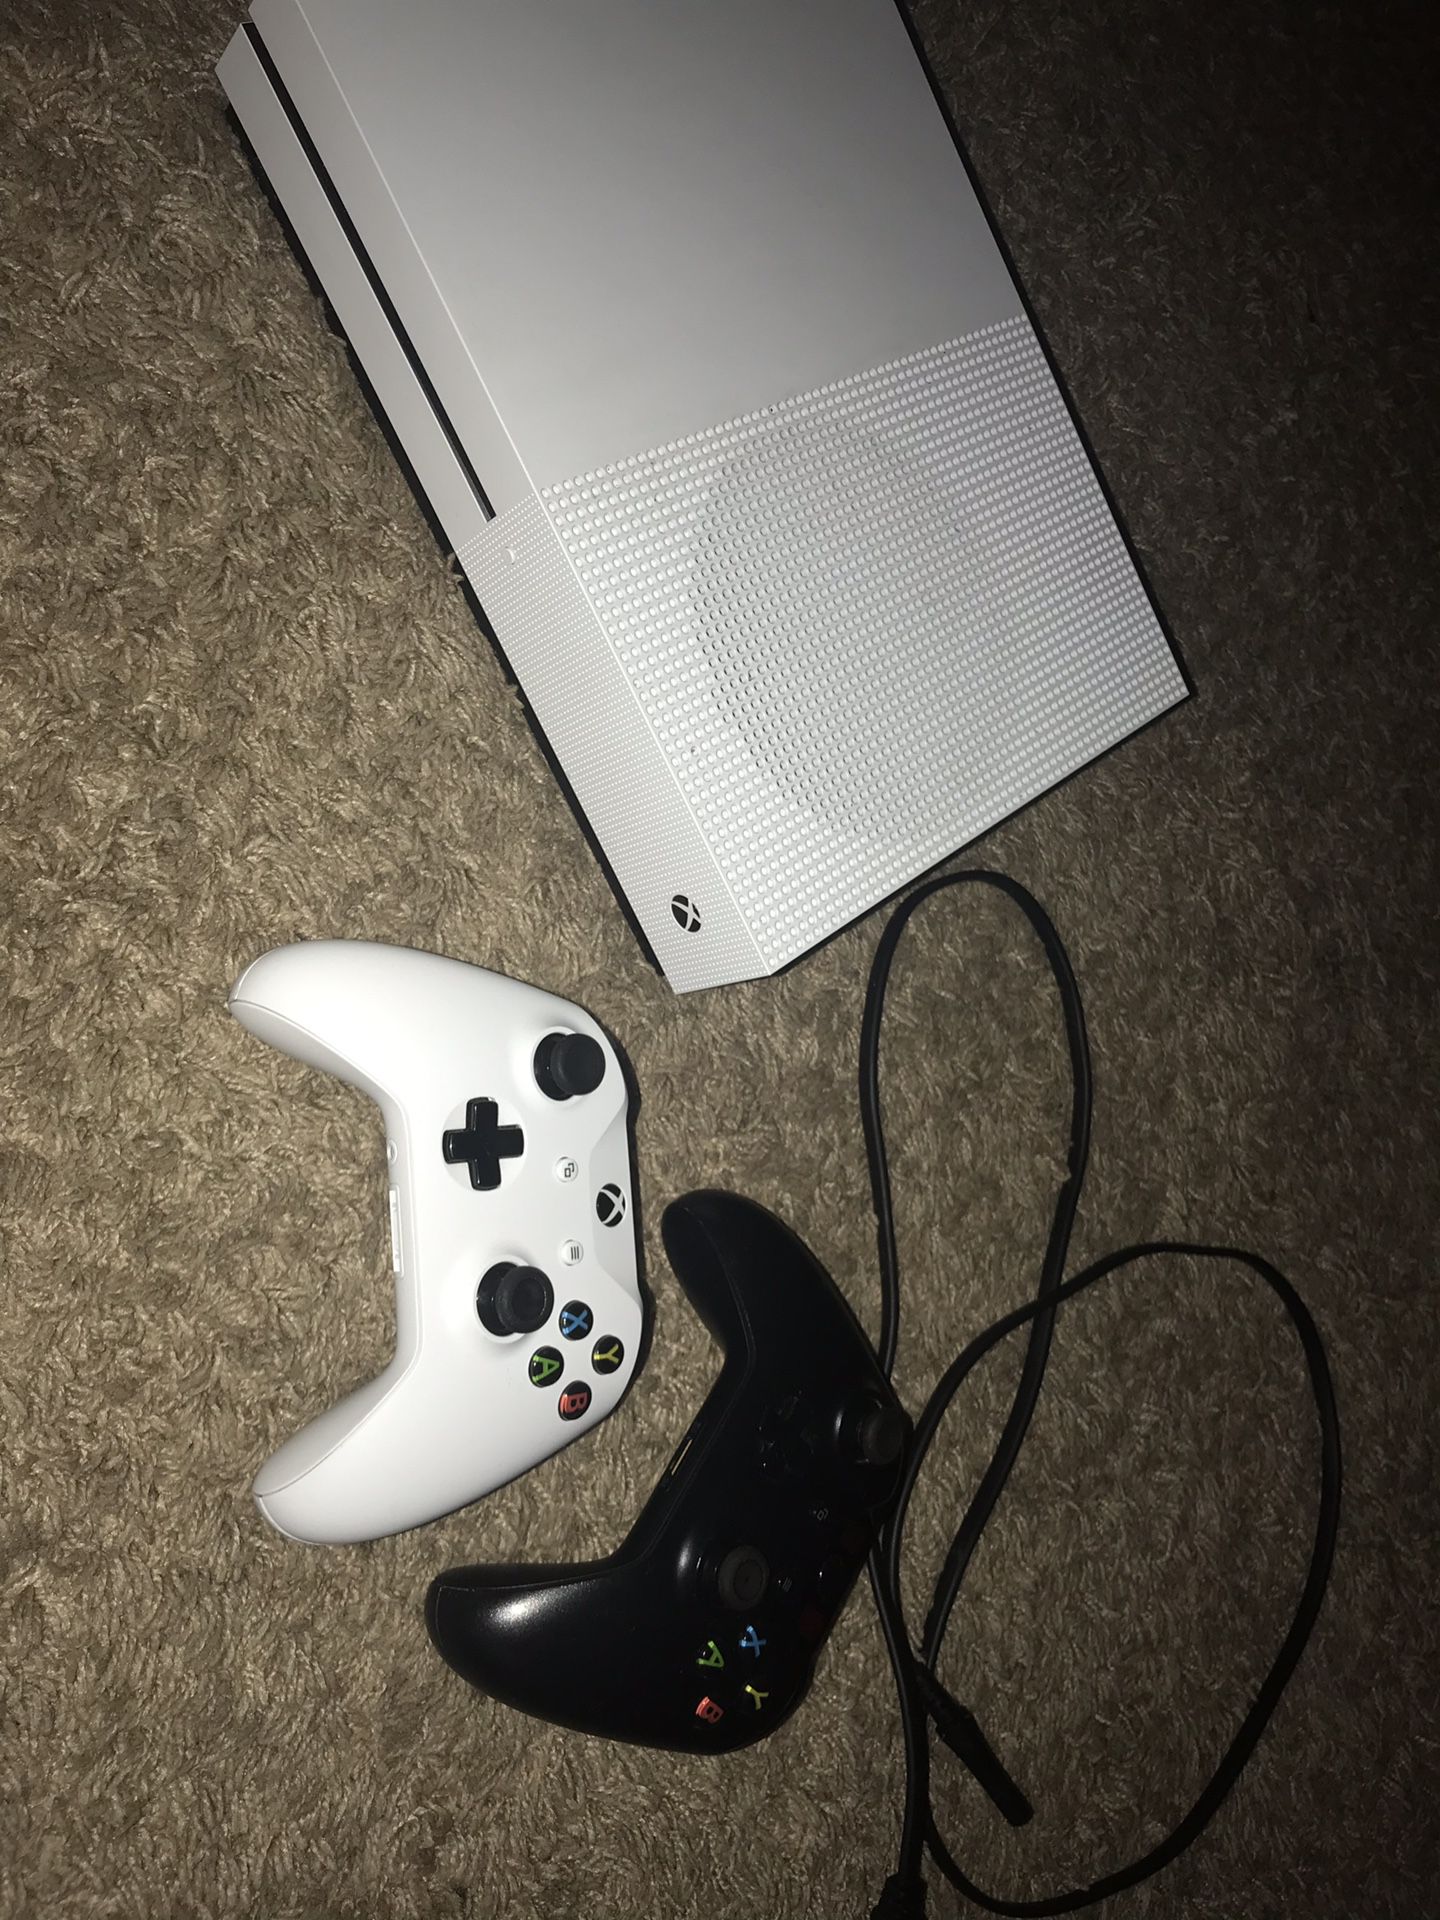 xbox one s & 2 controllers